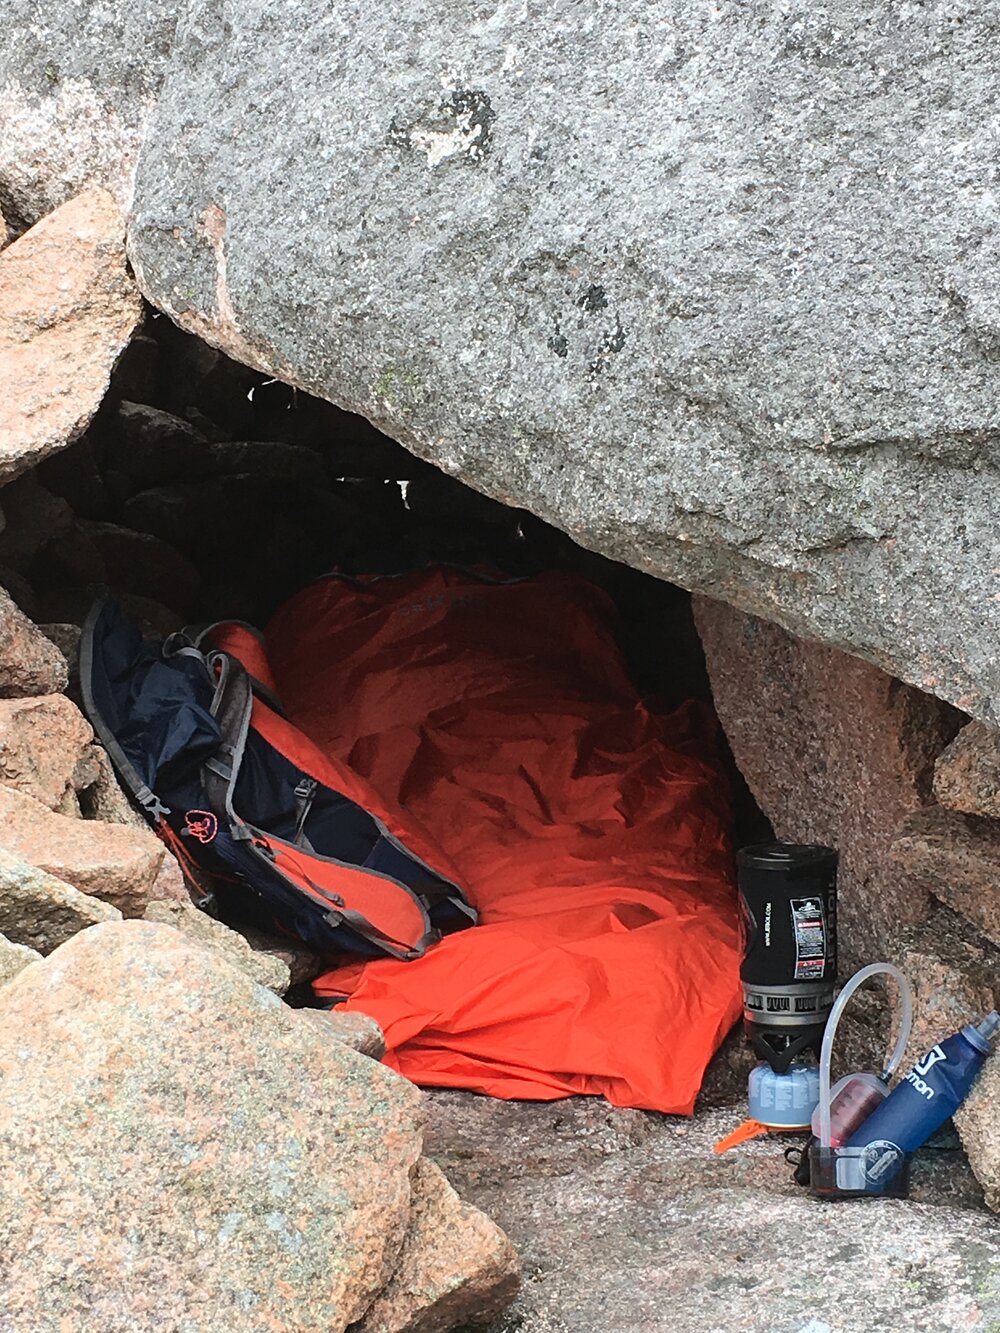 Sleeping under a rock in the Cairngorms